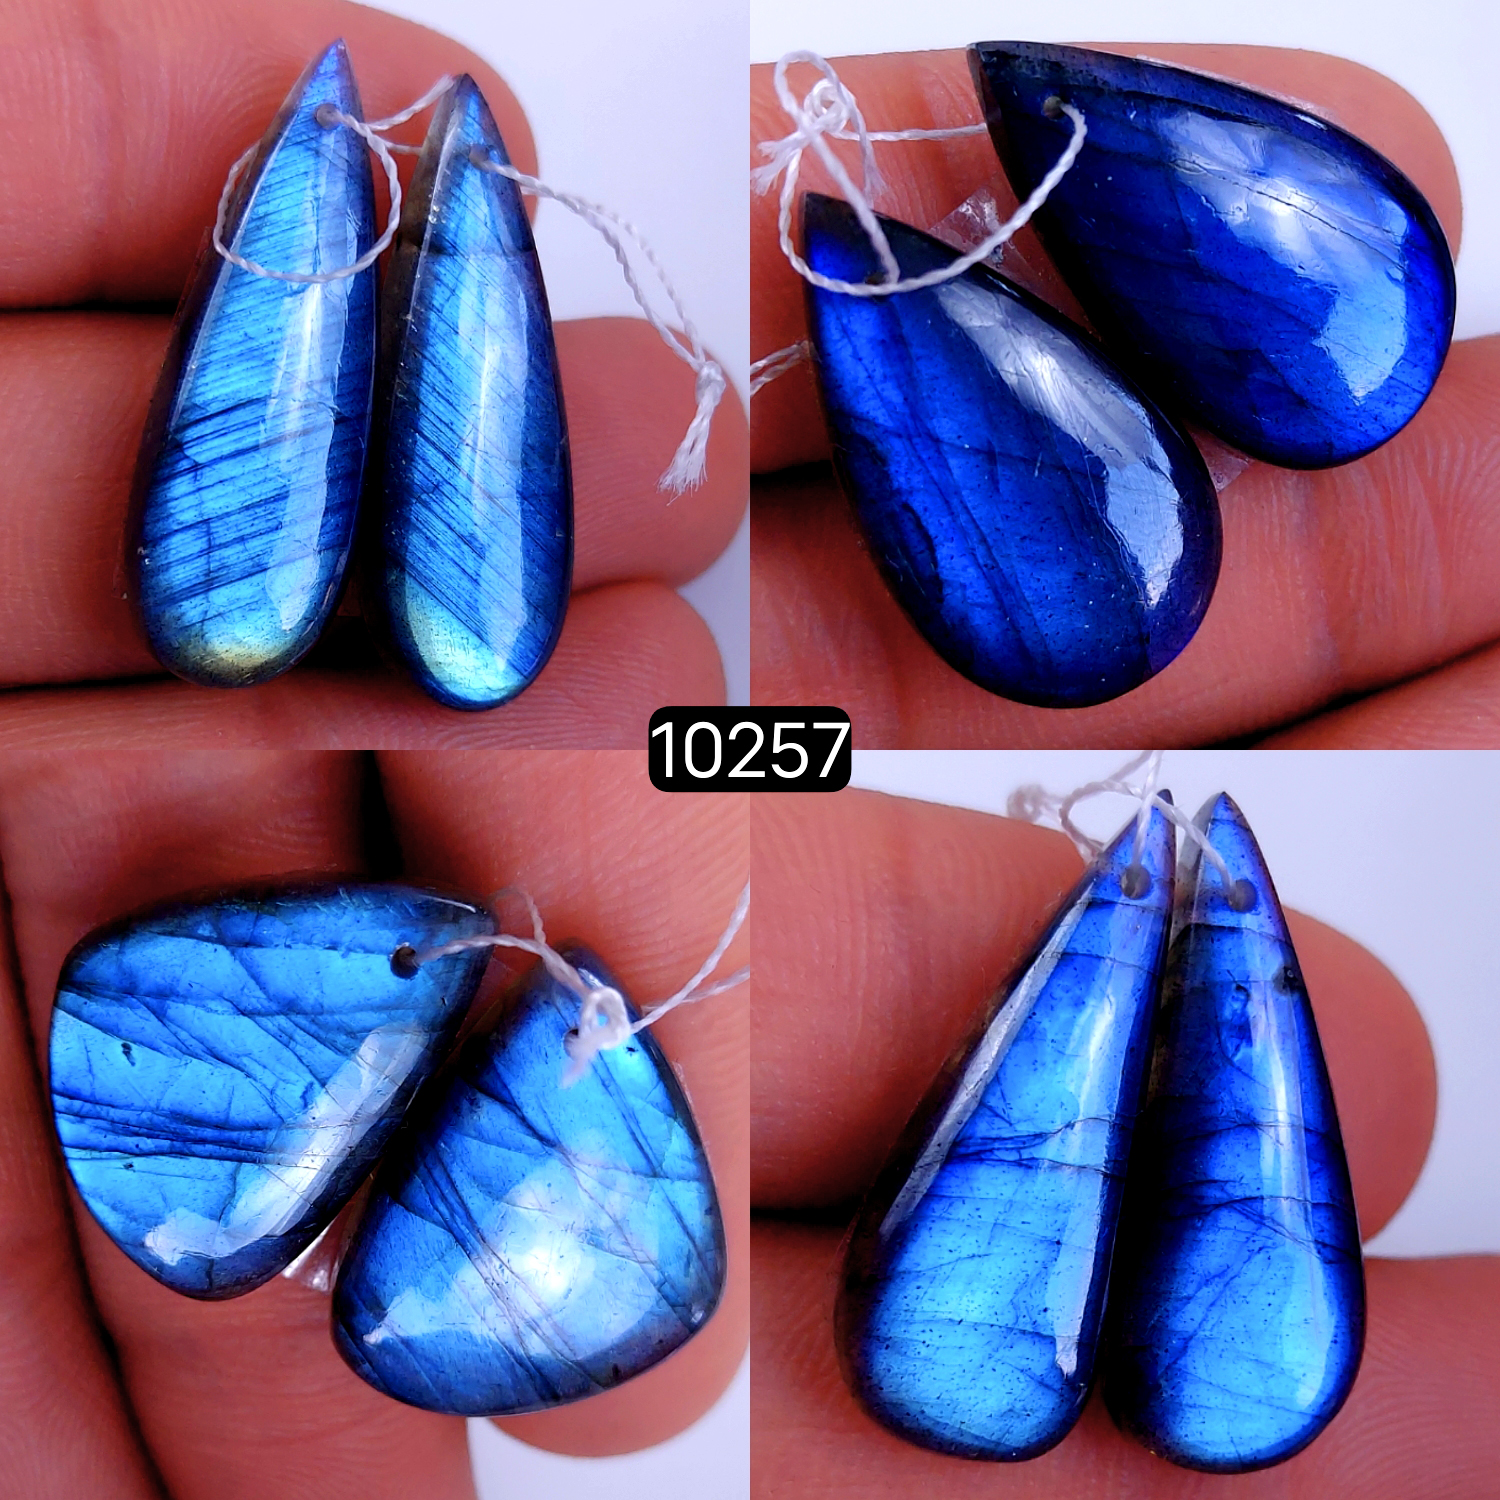 4Pair 118Cts Natural Labradorite Crystal Drill Dangle Drop Earring Pairs Silver Earrings Blue Labradorite Hoop Jewelry  30x10 20x16mm #10257